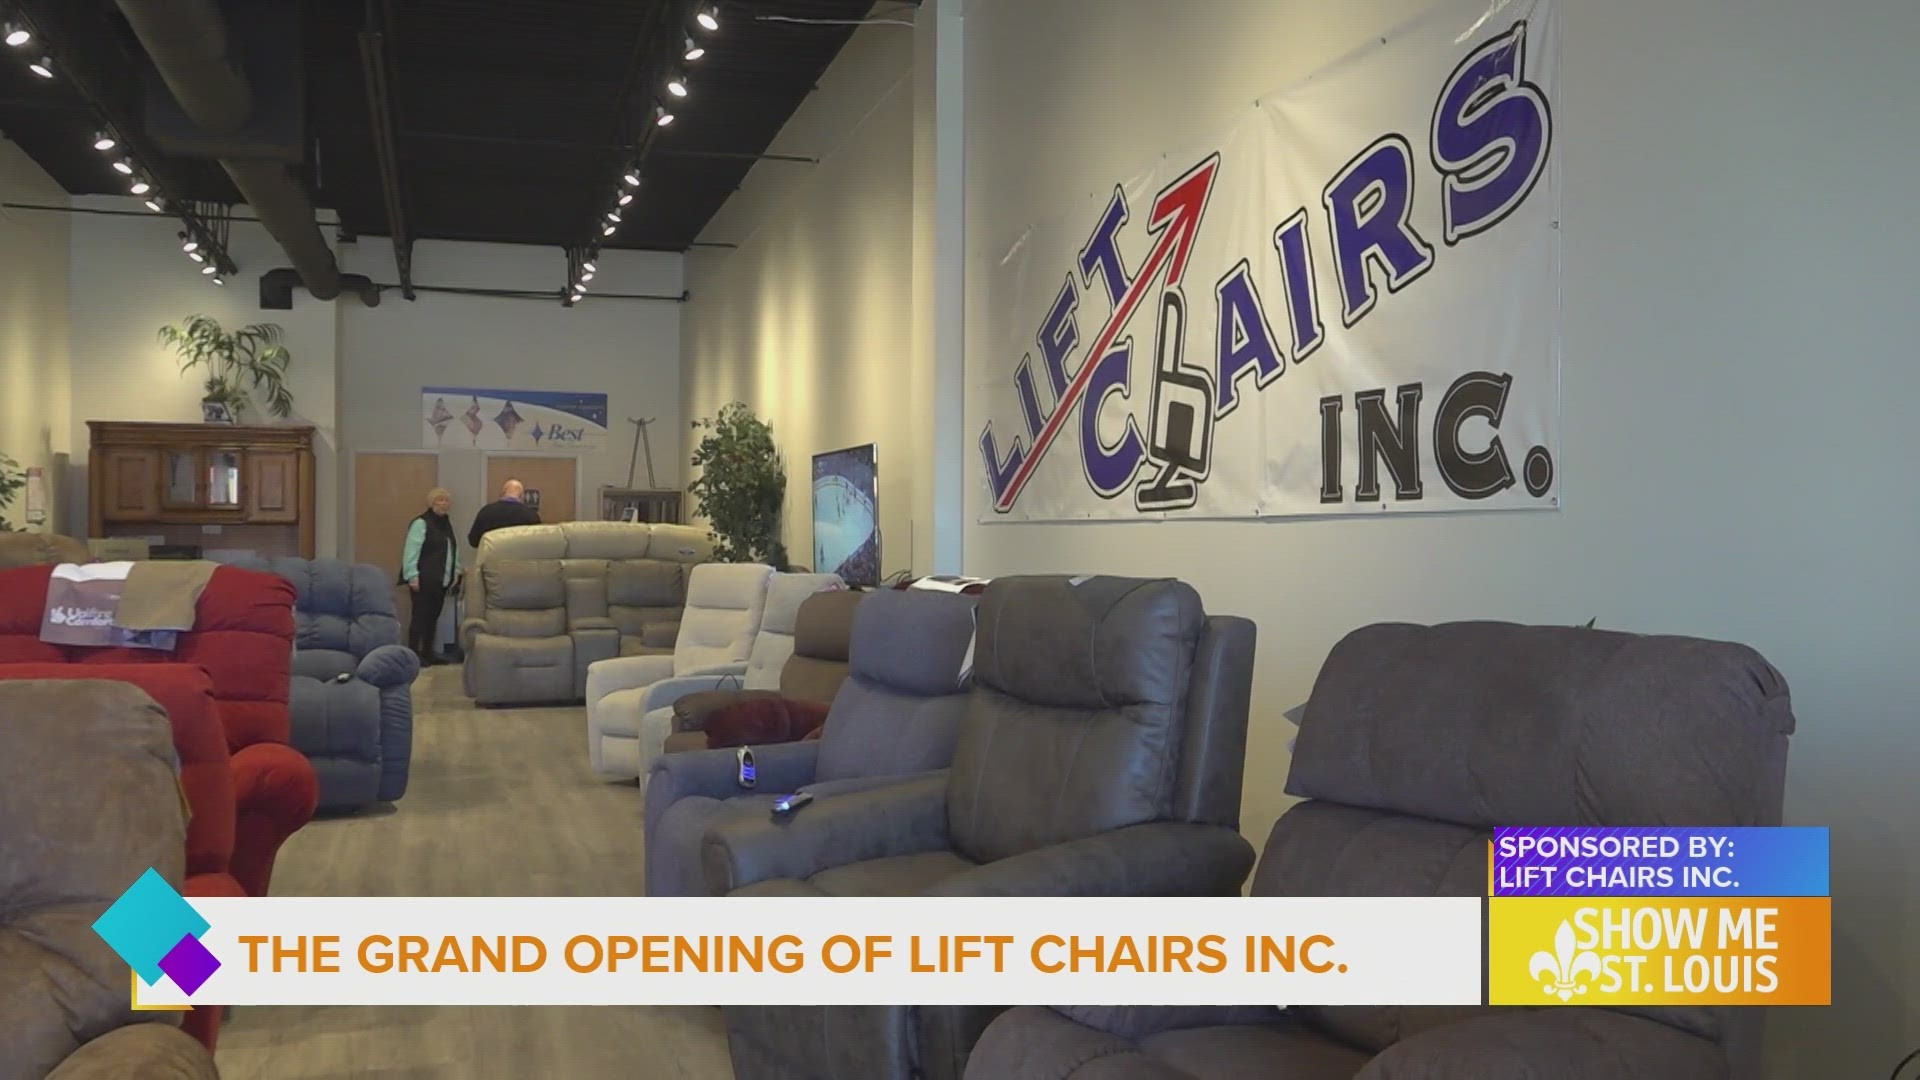 Save 50 percent on any chair for the Grand Opening Sale at Lift Chairs INC.